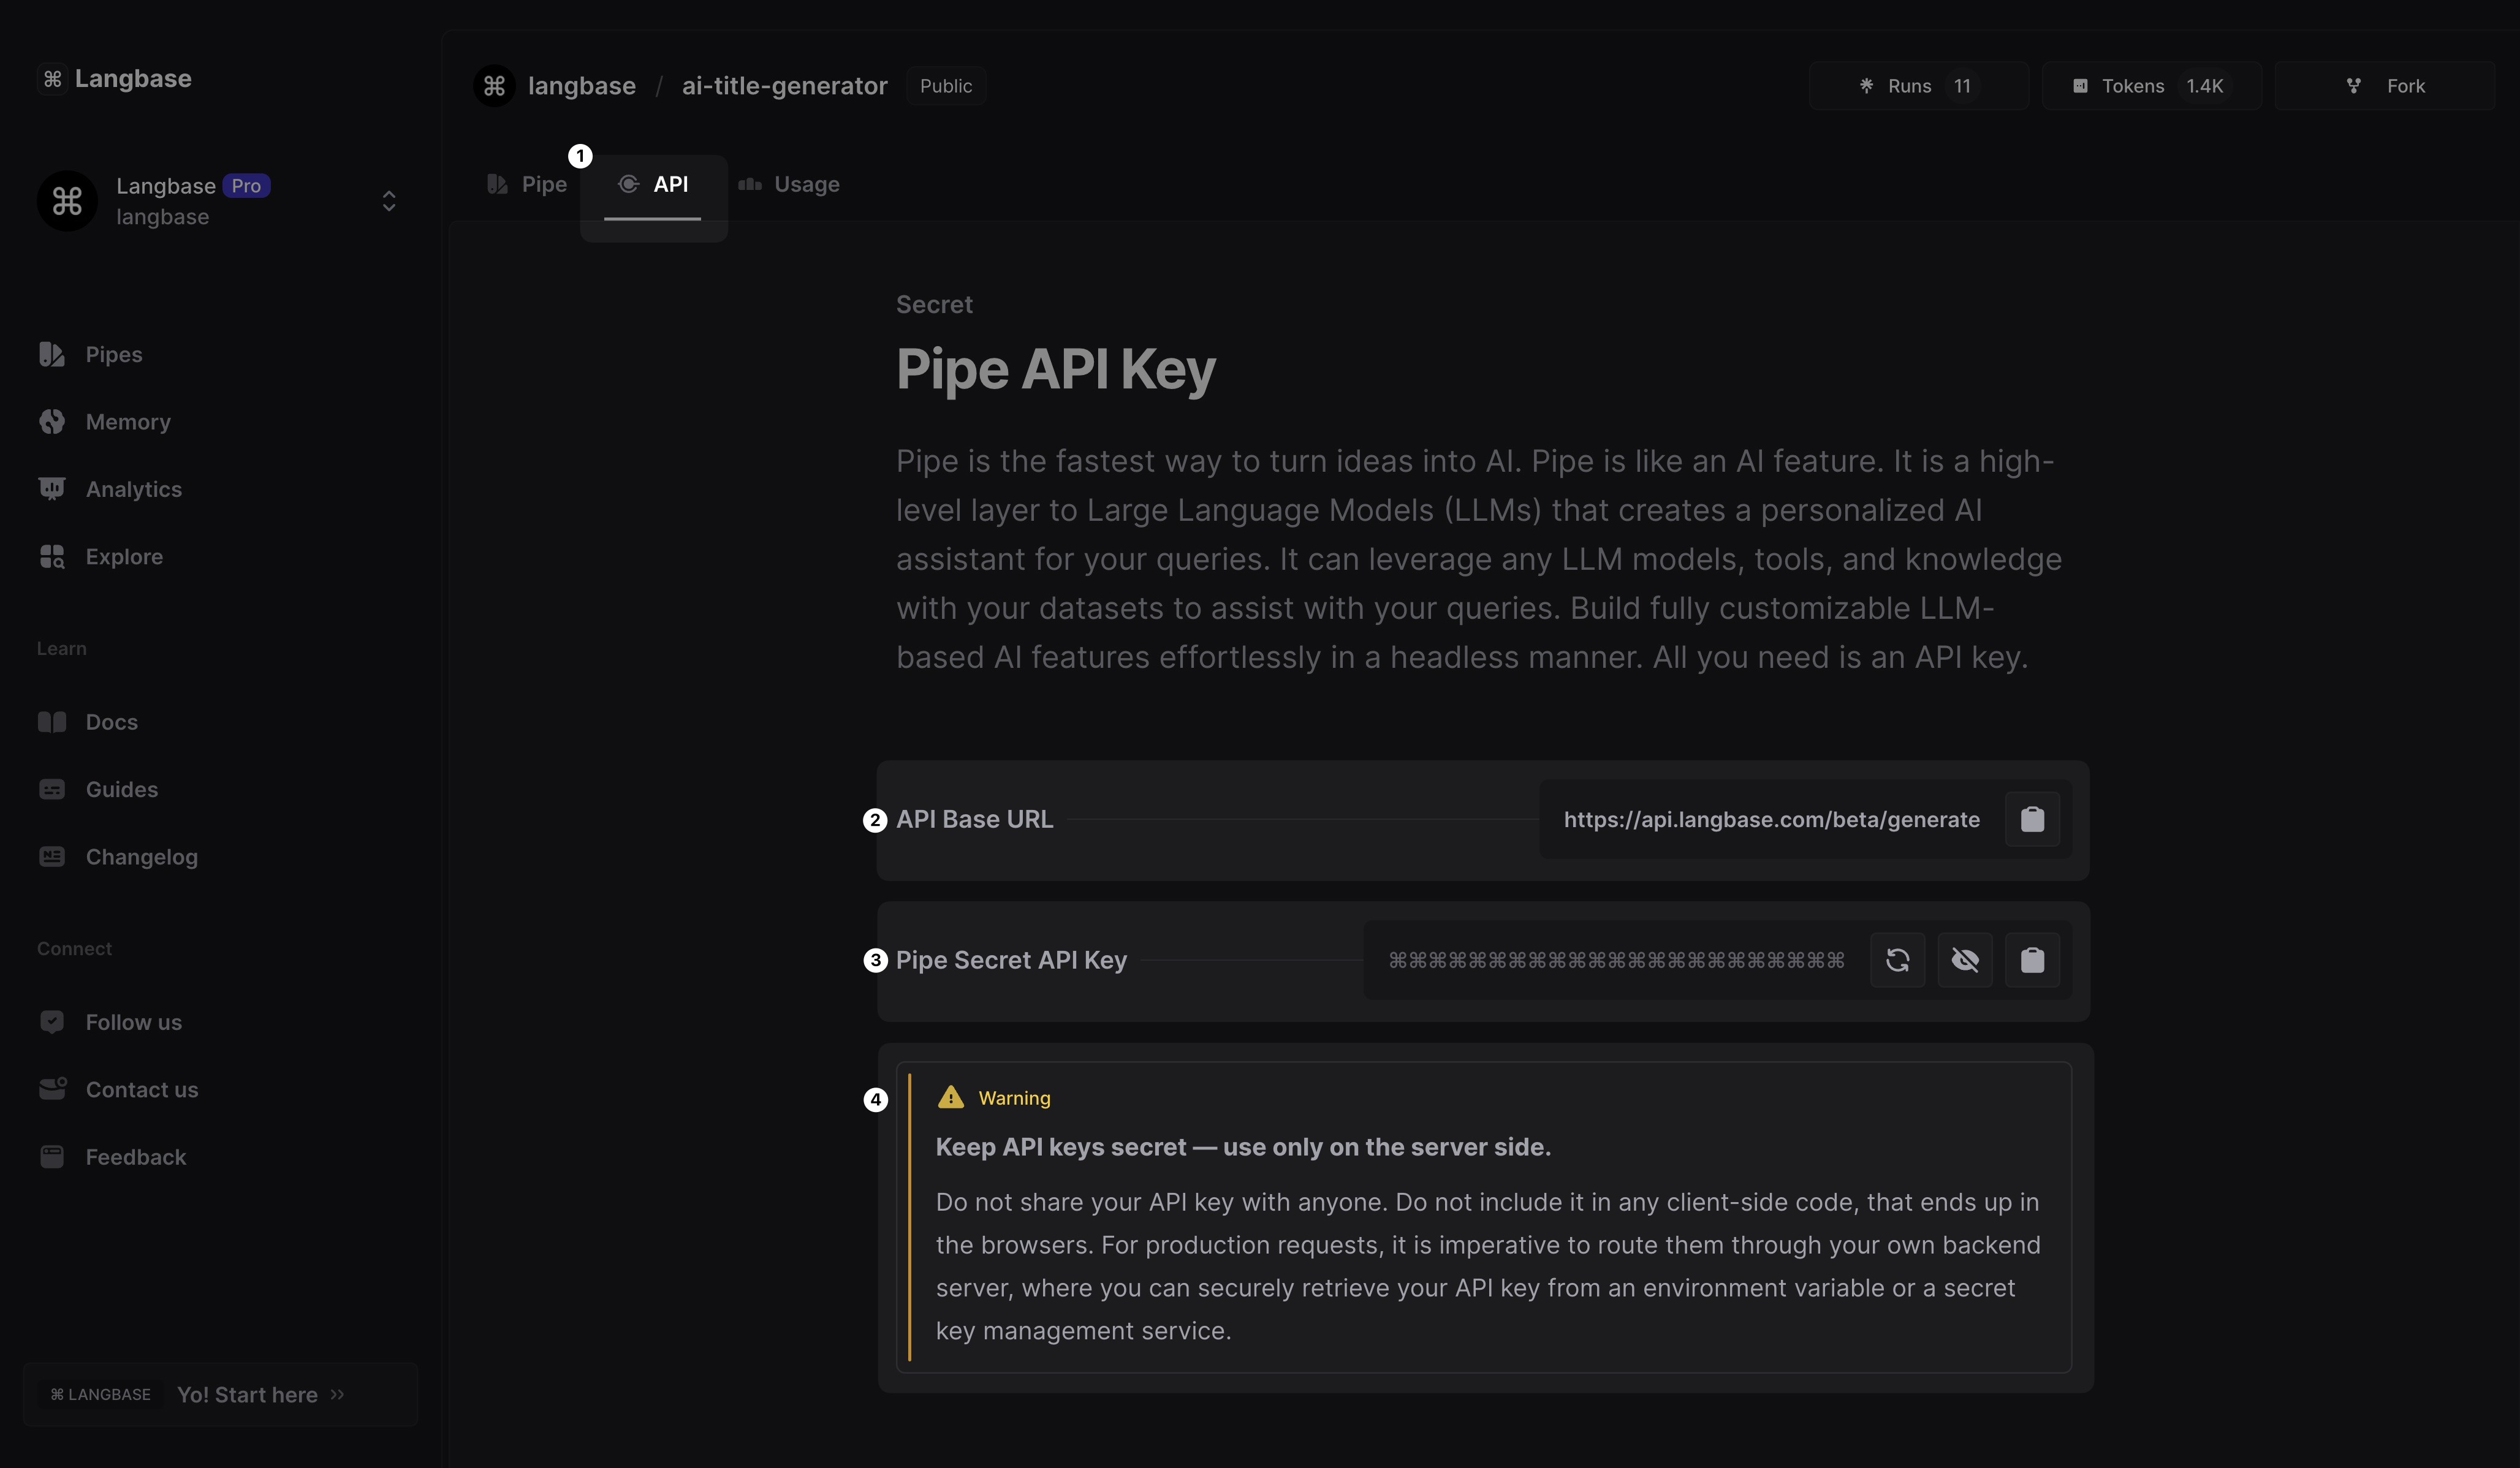 Pipe API and API Key: Use your Pipe in your apps